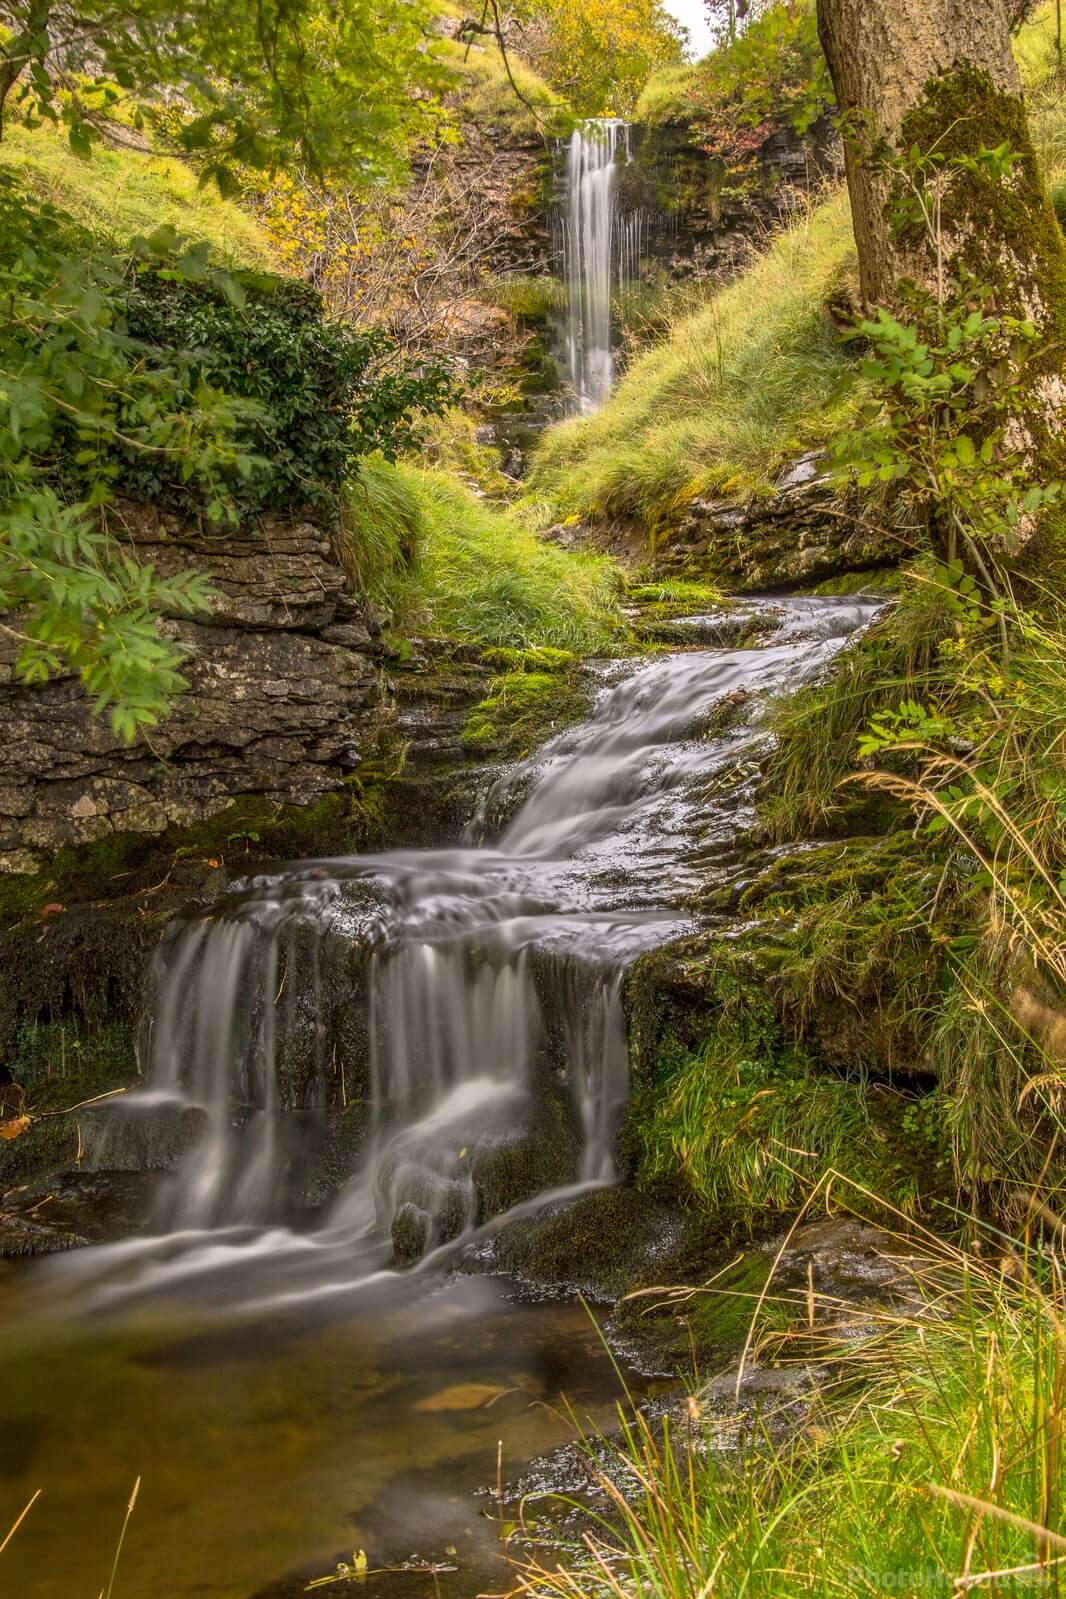 Image of Buckden Beck, Wharfedale by Andy Killingbeck